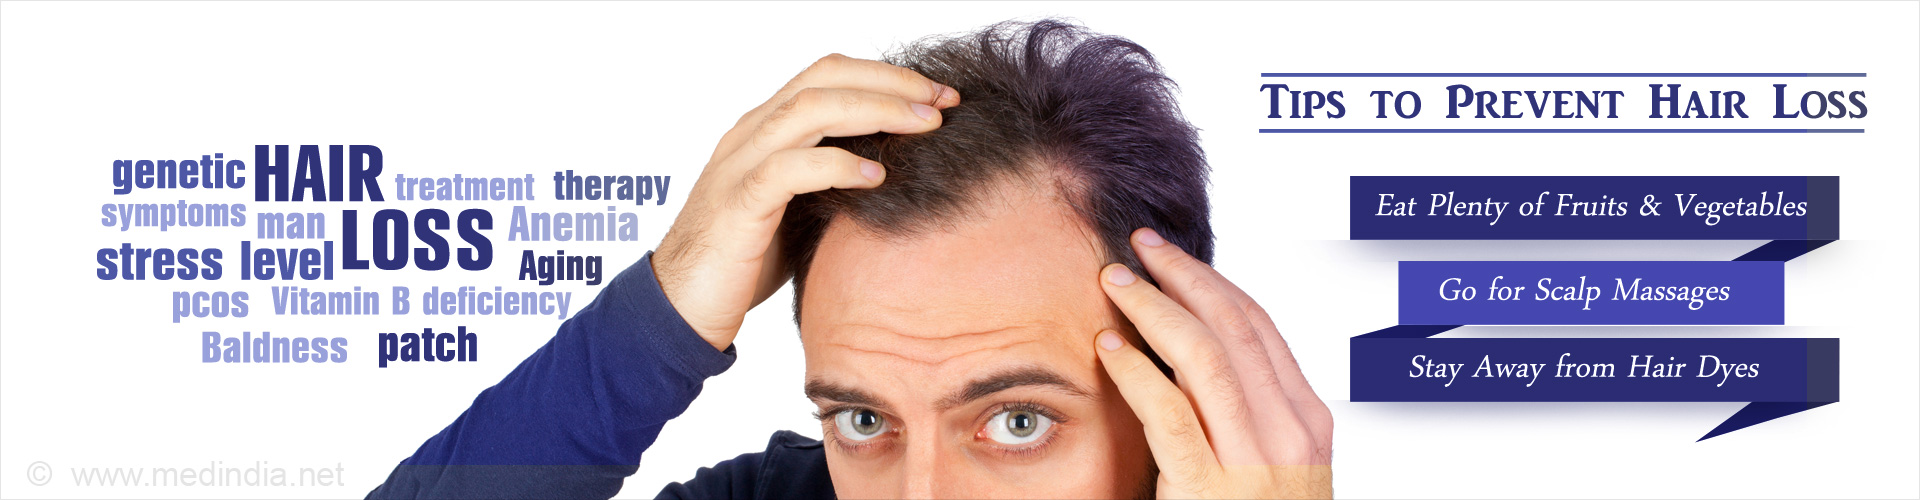 Top Tips For Hair Loss Prevention How To Stop Hair Fall